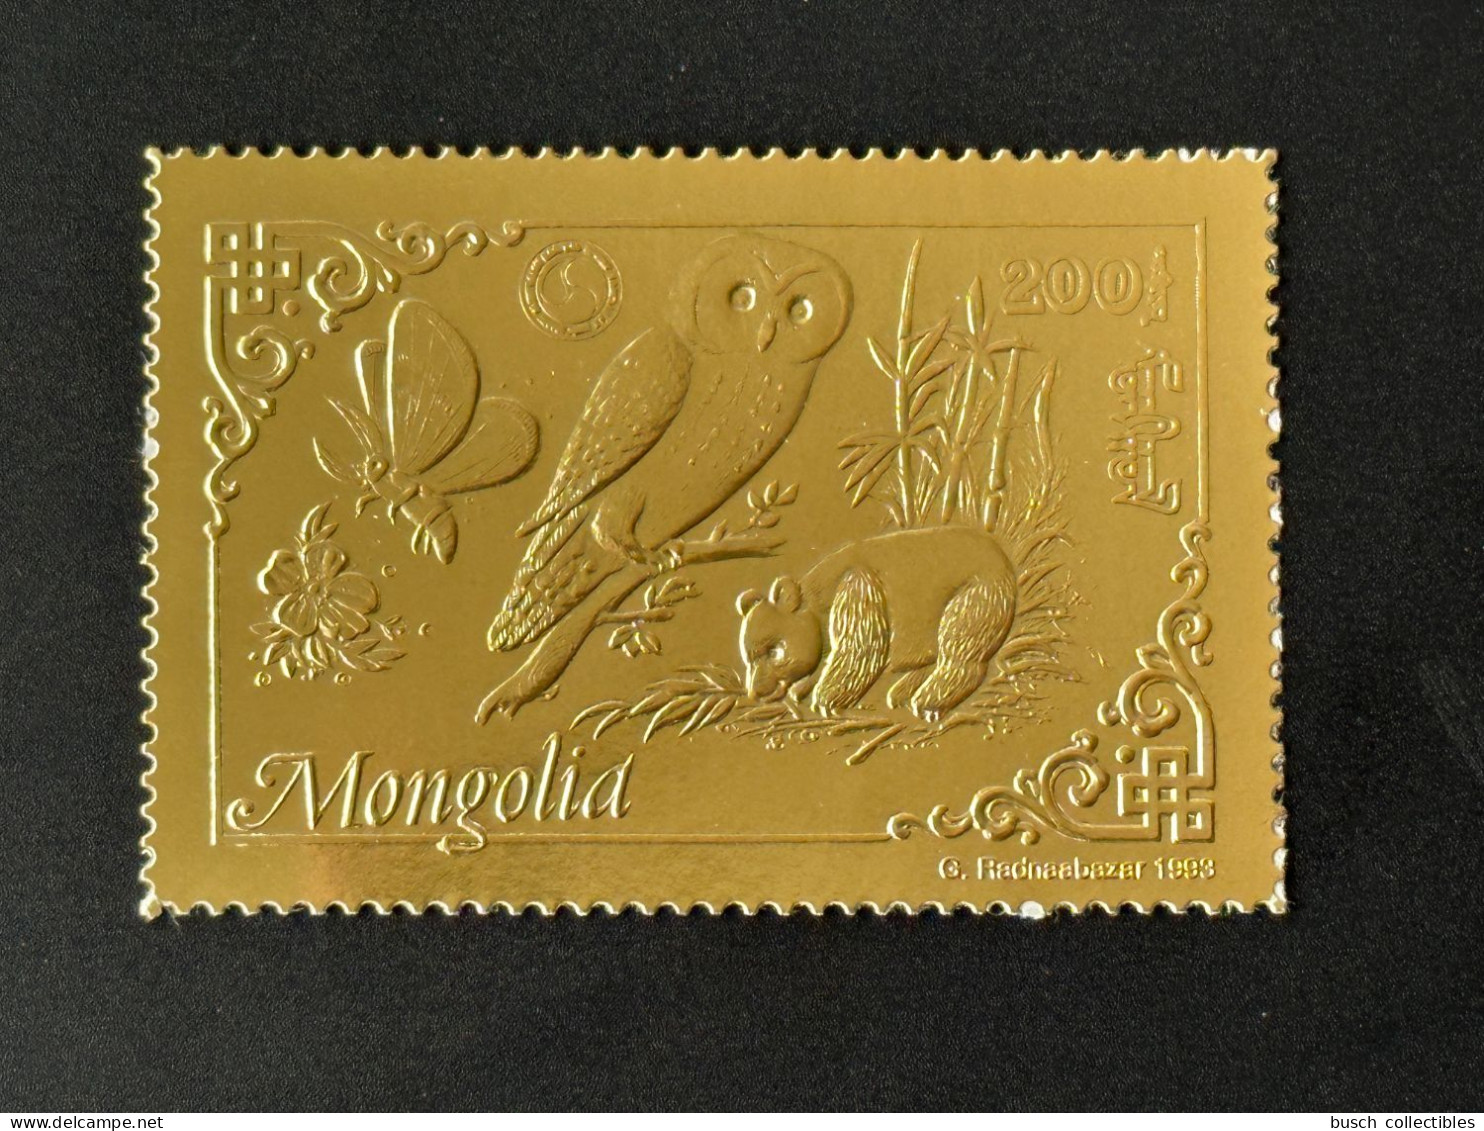 Mongolie Mongolia 1993 Mi. 2475 A Or Gold Rotary Lions Butterfly Owl Eule Panda Papillon Schmetterling Chouette - Orsi